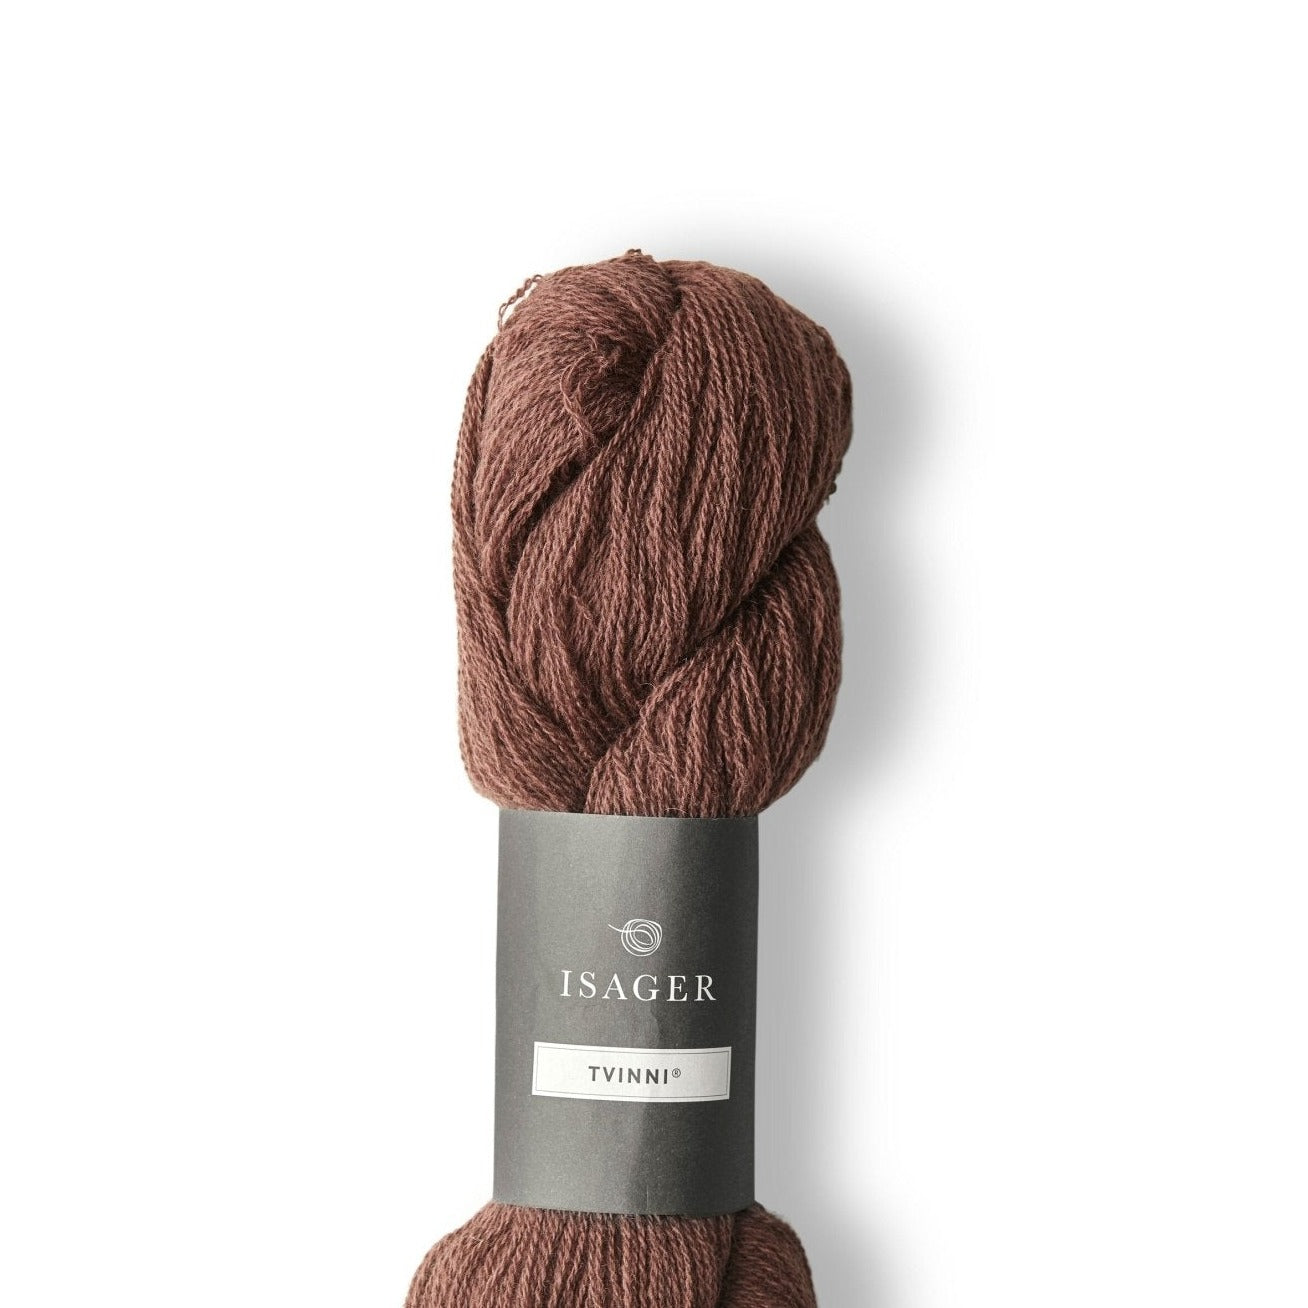 Isager Tvinni - 52s - 4 Ply - Isager - The Little Yarn Store